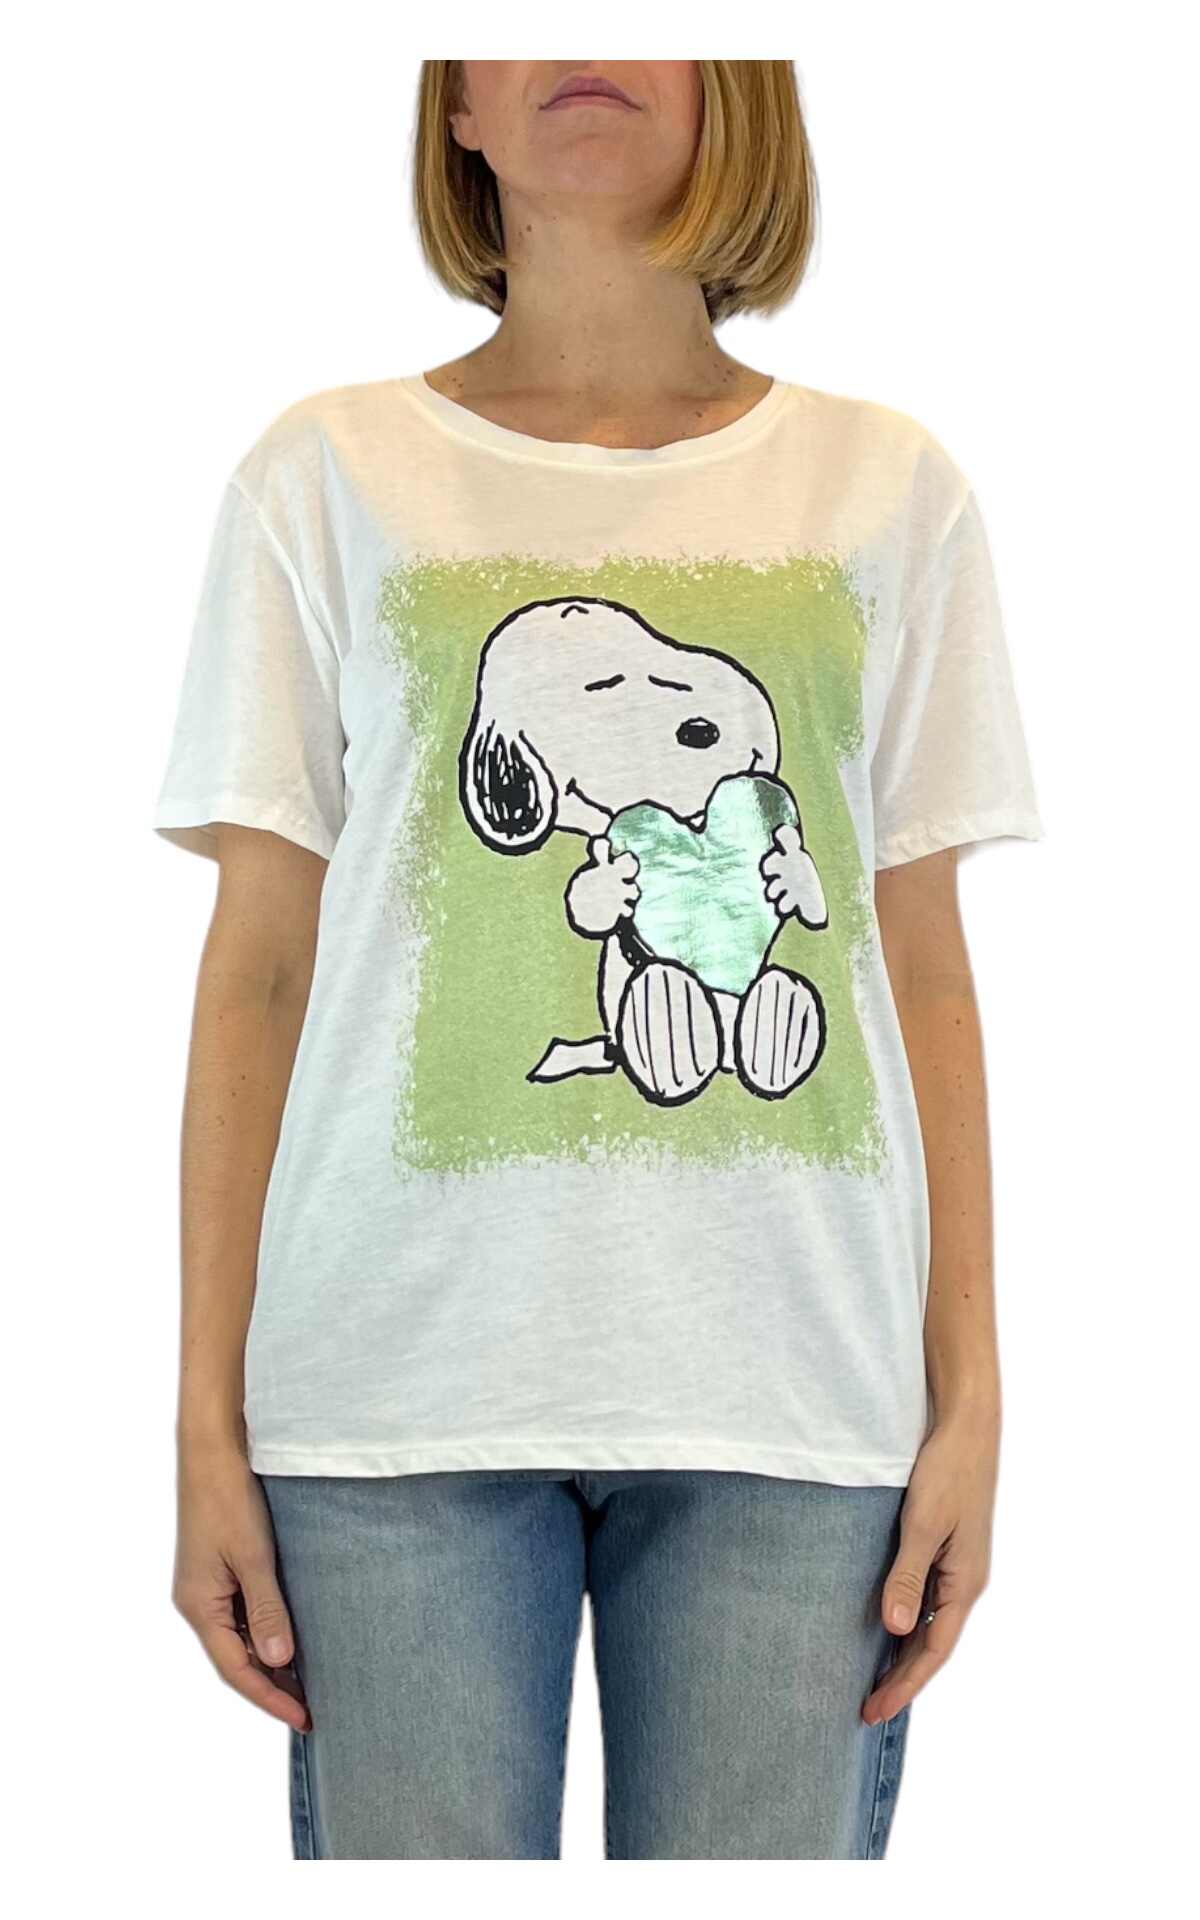 Off-on - T-shirt stampa snoopy - verde